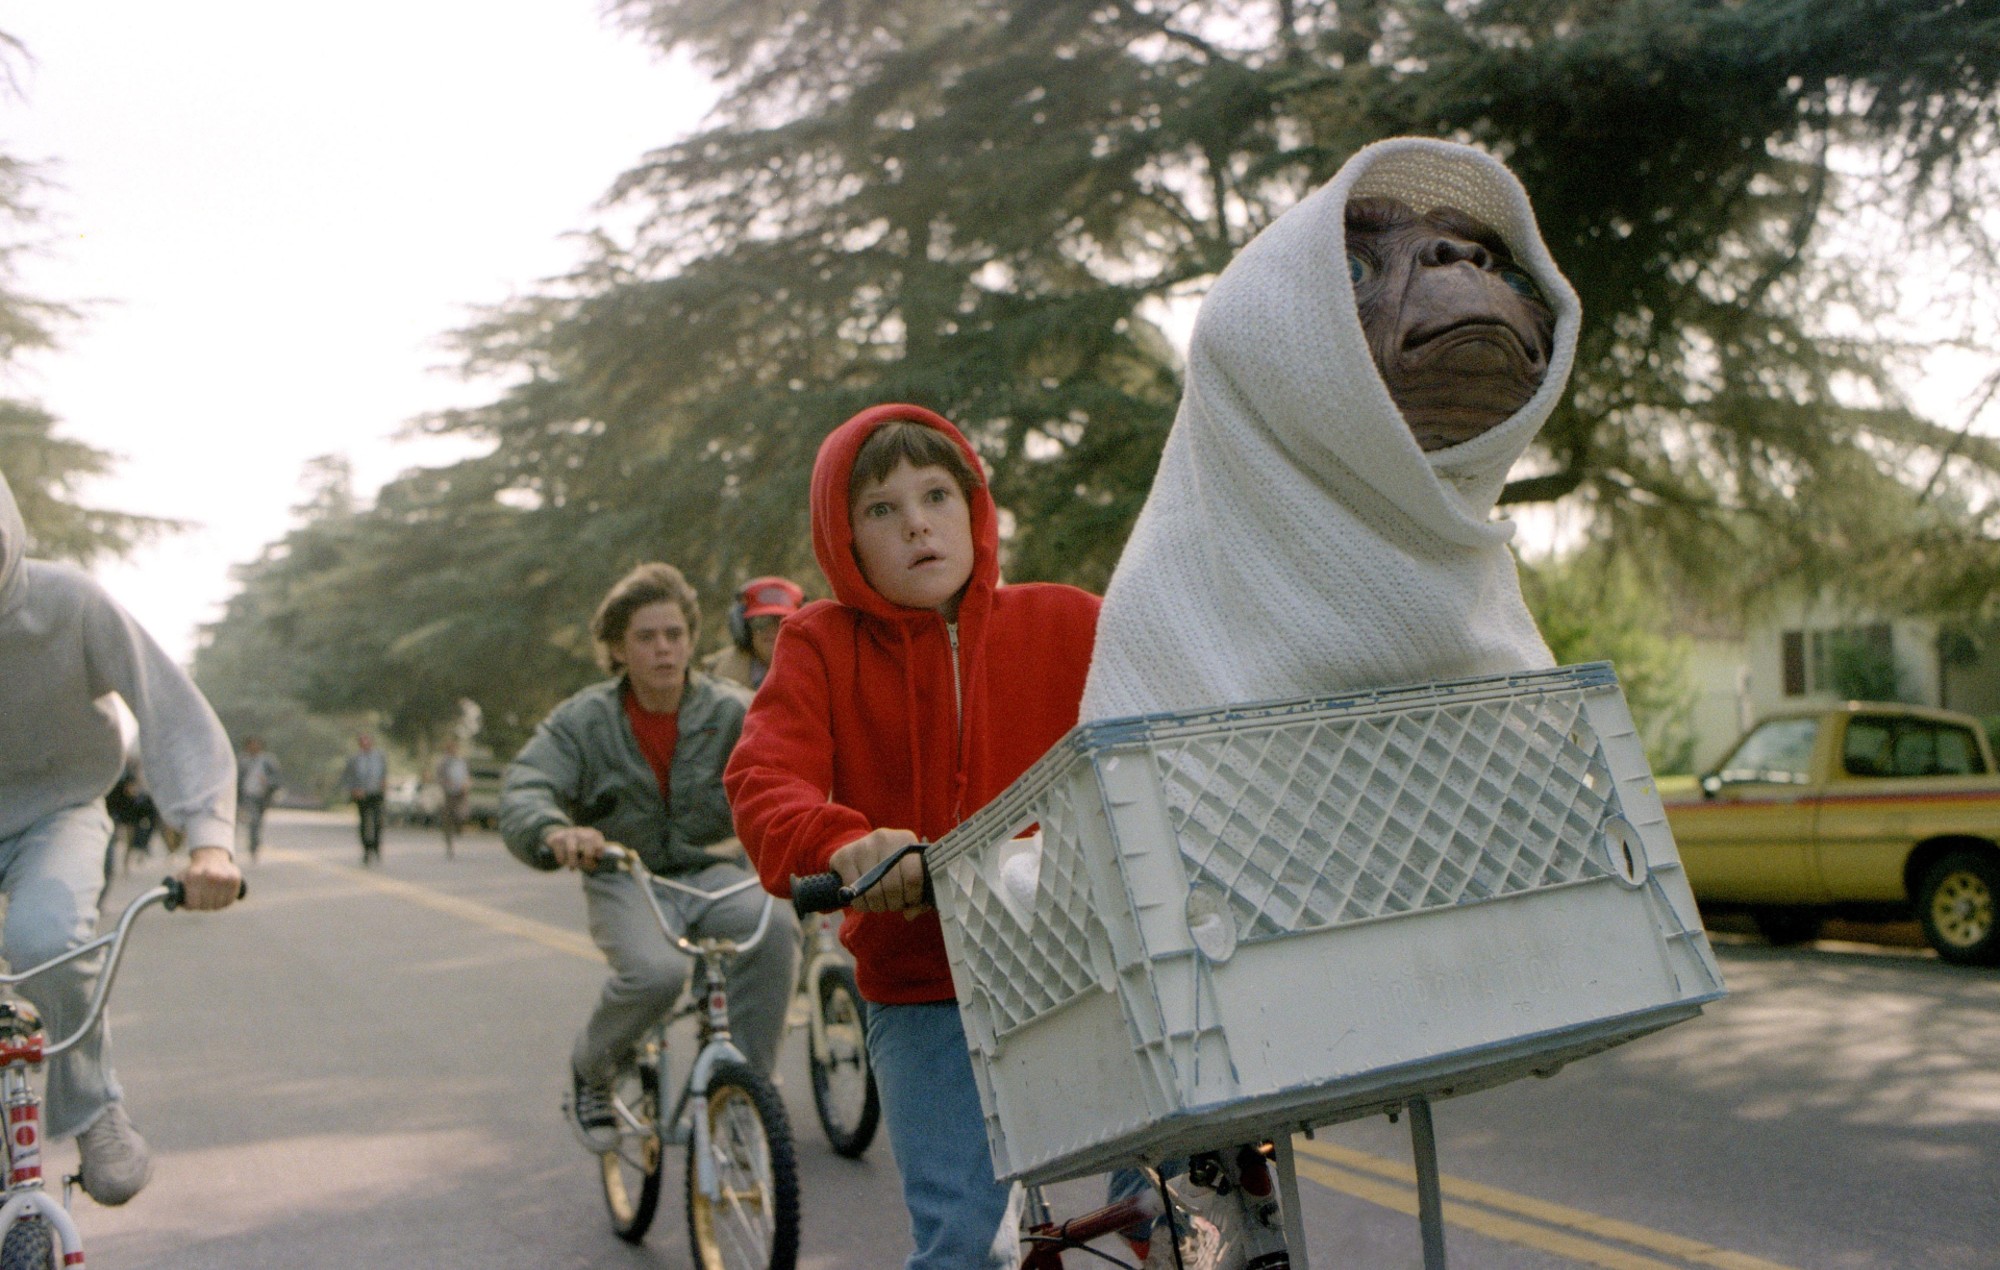 Steven Spielberg says it was a “mistake” editing guns out of ‘E.T.’